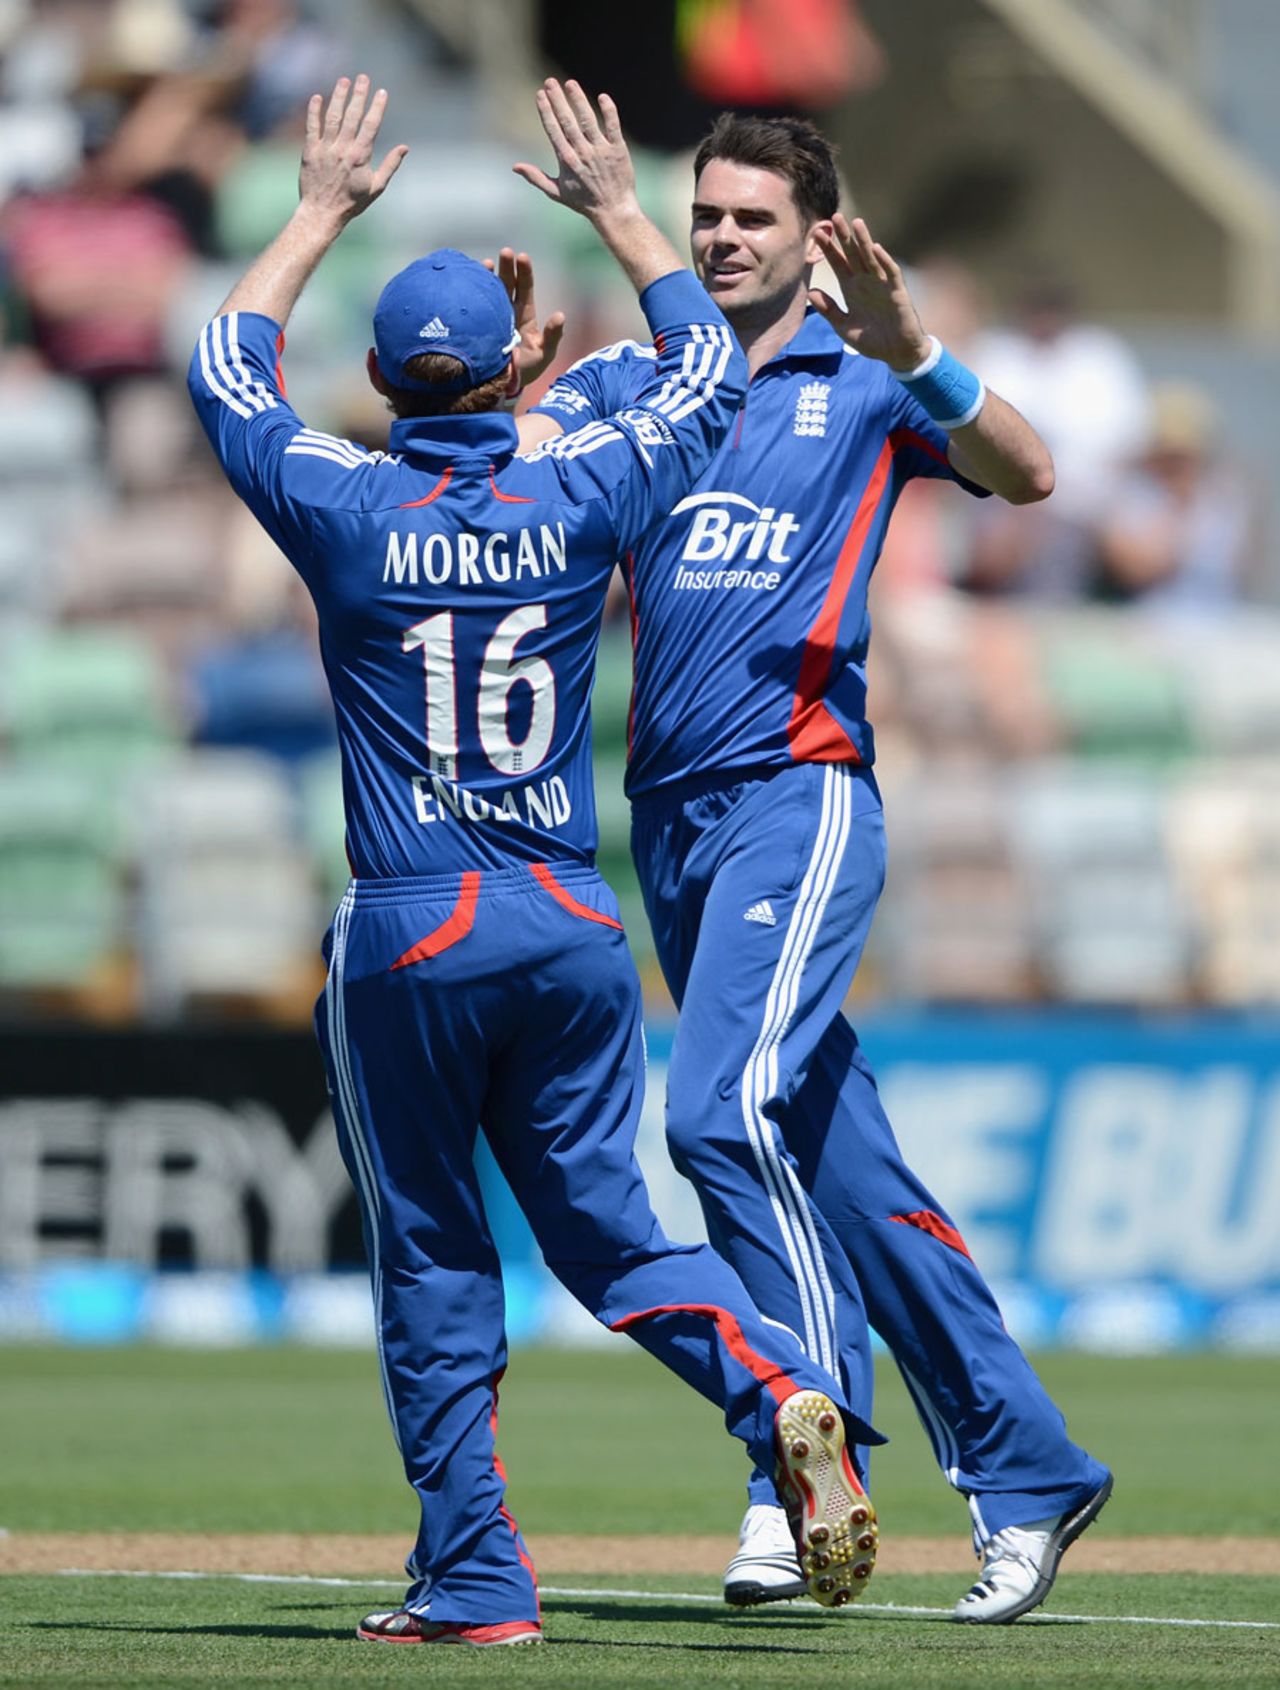 James Anderson took two wickets in his opening spell, New Zealand v England, 2nd ODI, Napier, February 20, 2013